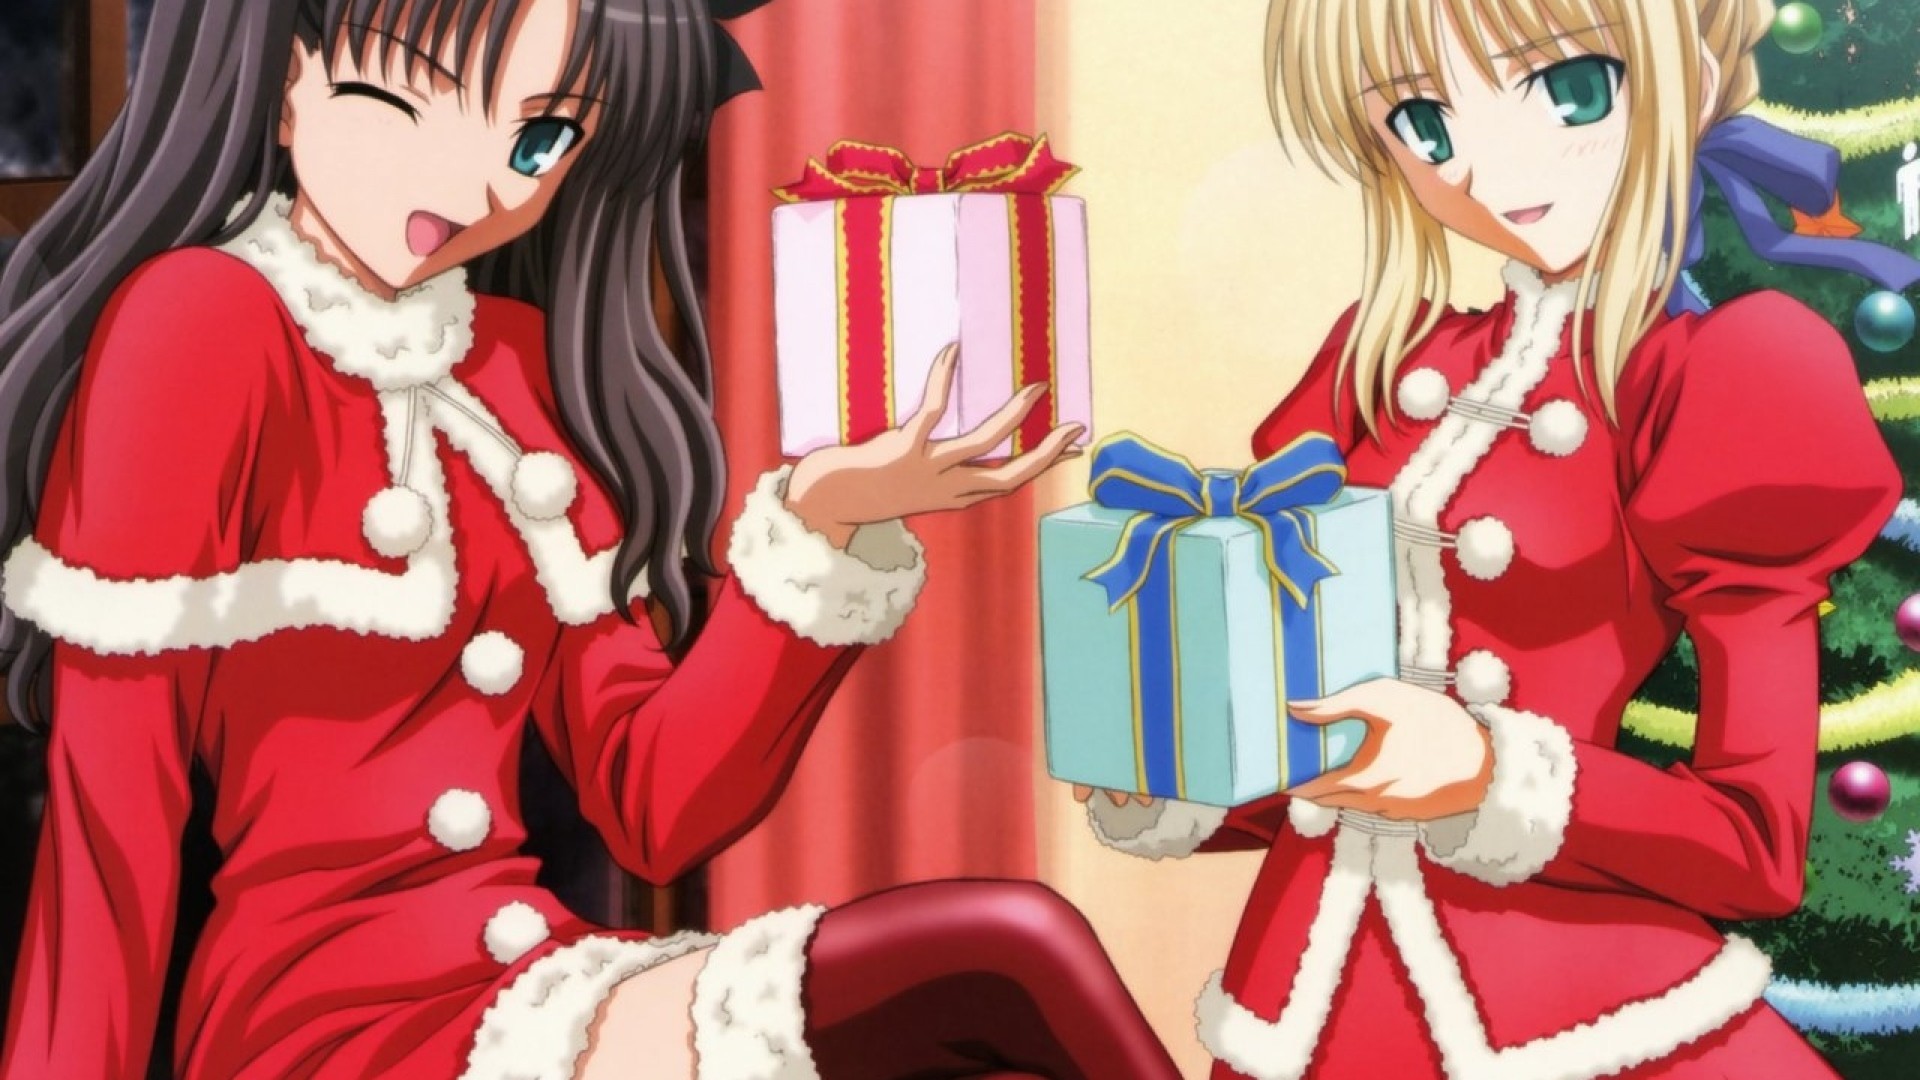 1920x1080  Wallpaper new year, christmas, anime, gifts, girls